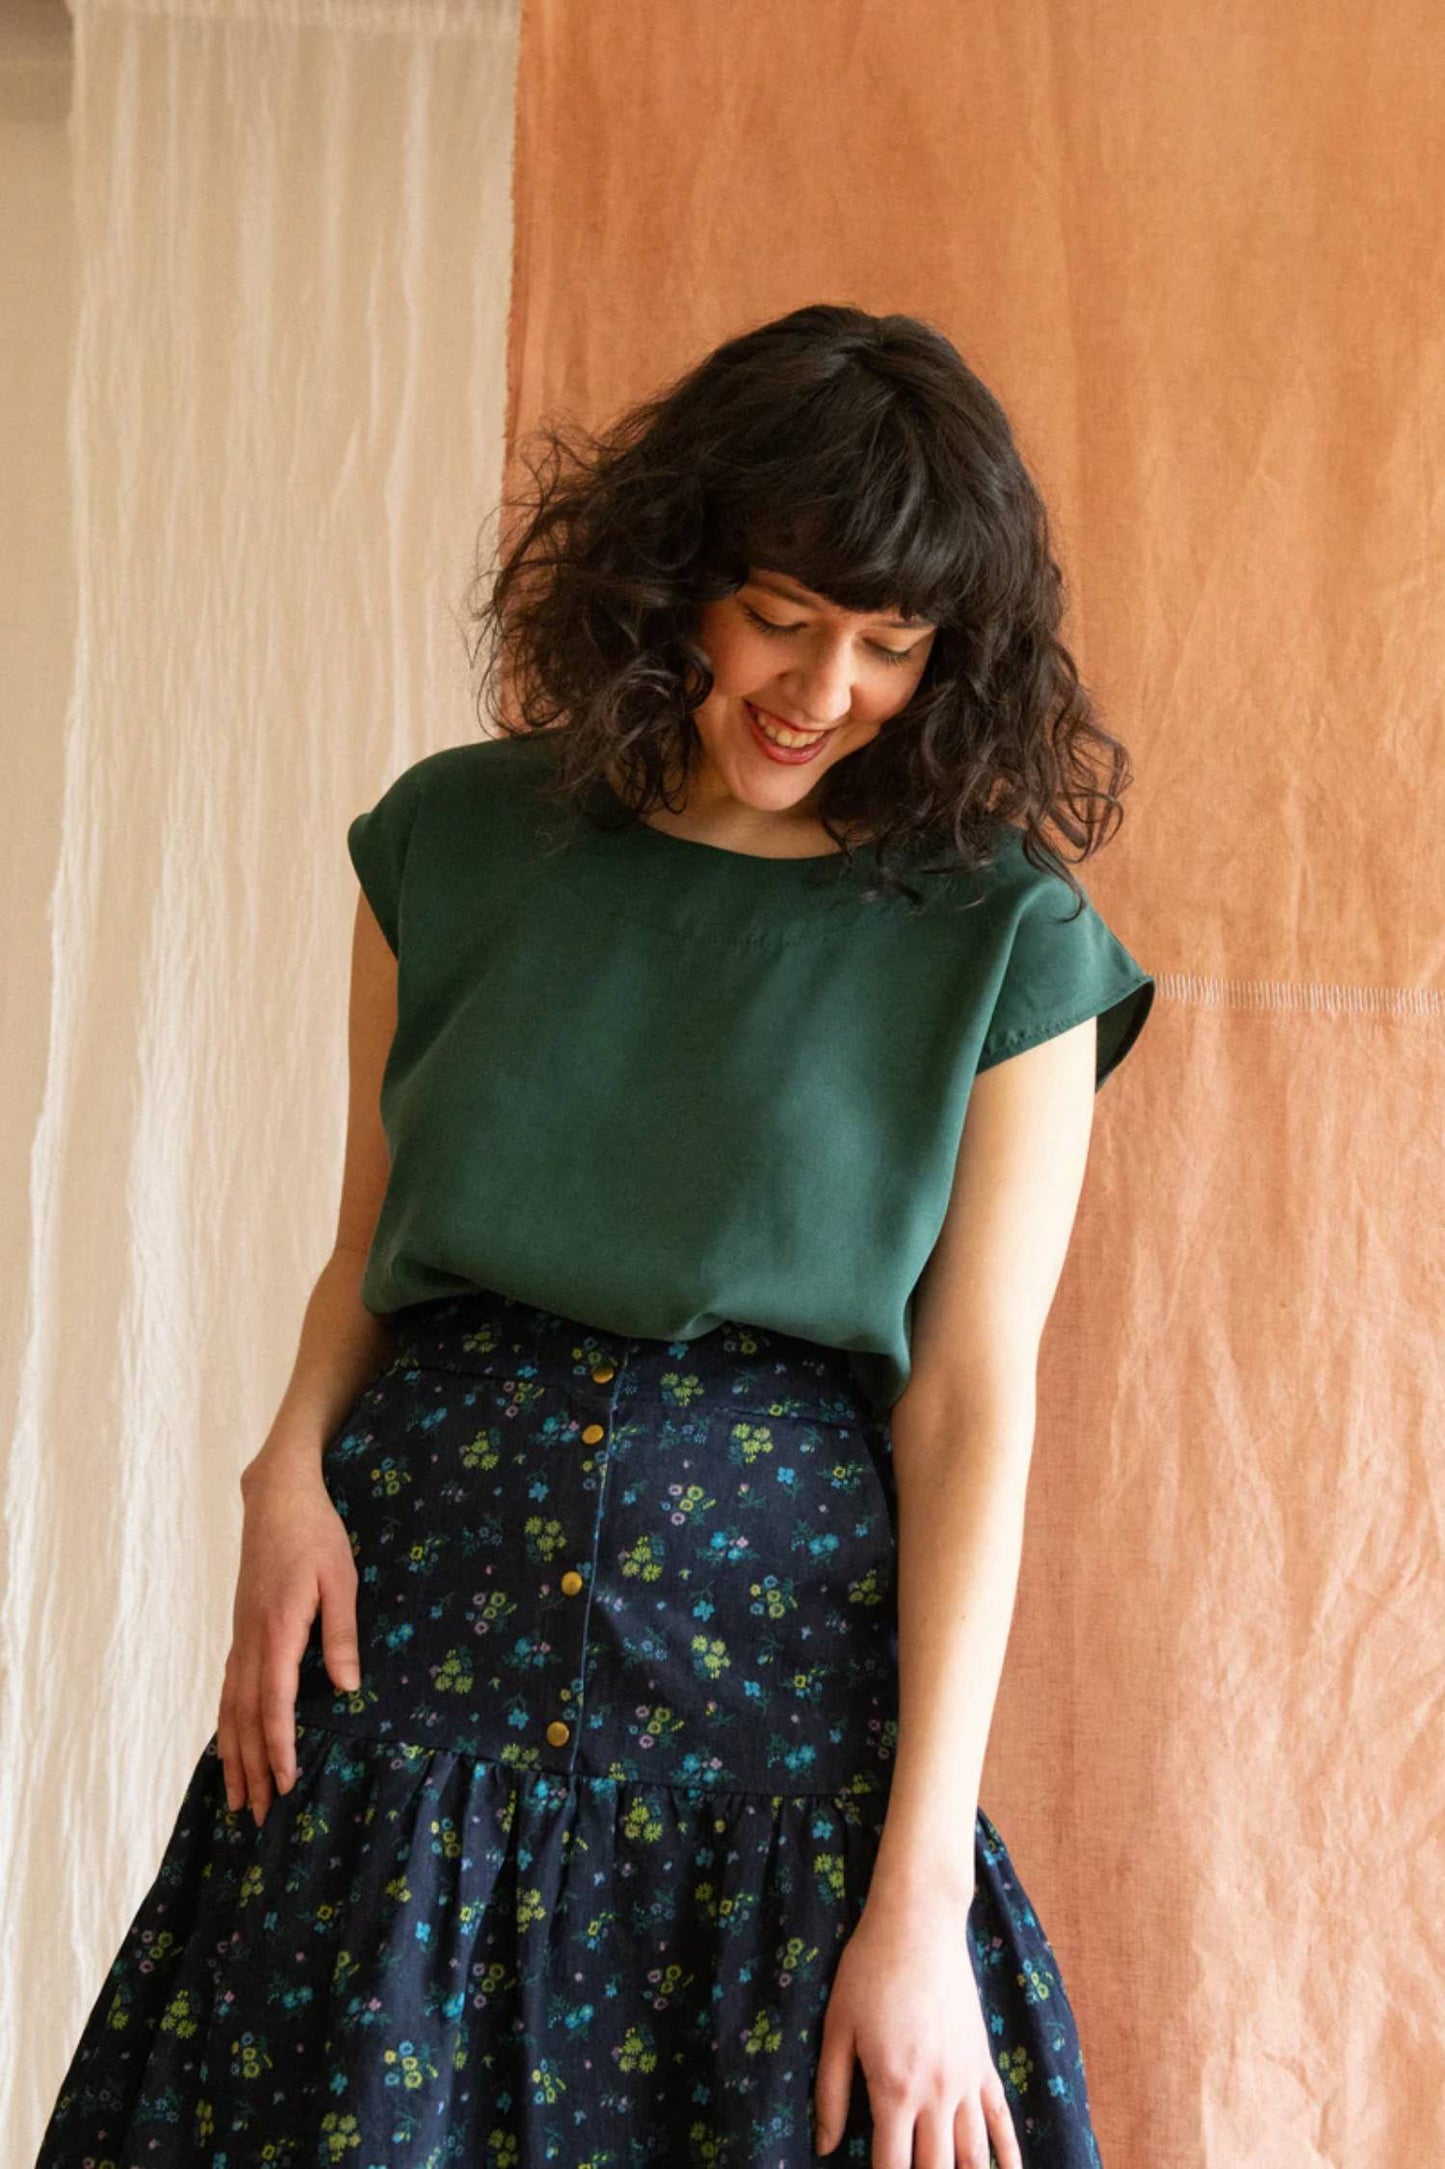 Campanule Skirt by Kazak, Forest Green, midi-length, tiered skirt, elastic at back of waist, brass buttons, two pockets, eco-fabric, organic cotton, OEKO-TEX certified, sizes XS to XL, made in Montreal 